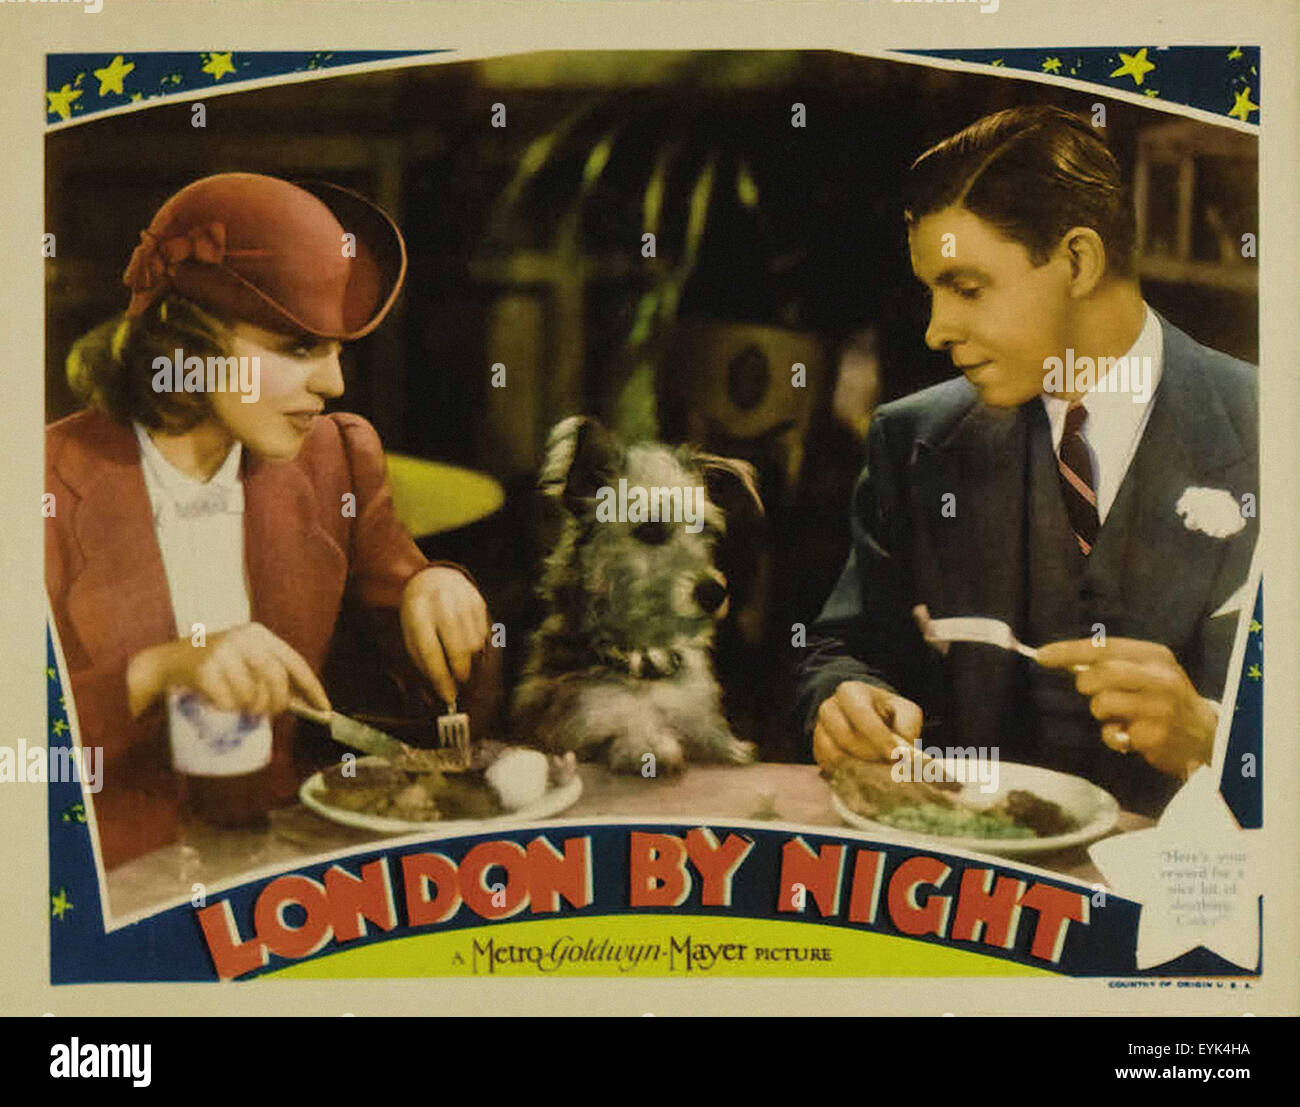 London by Night - Movie Poster Stock Photo